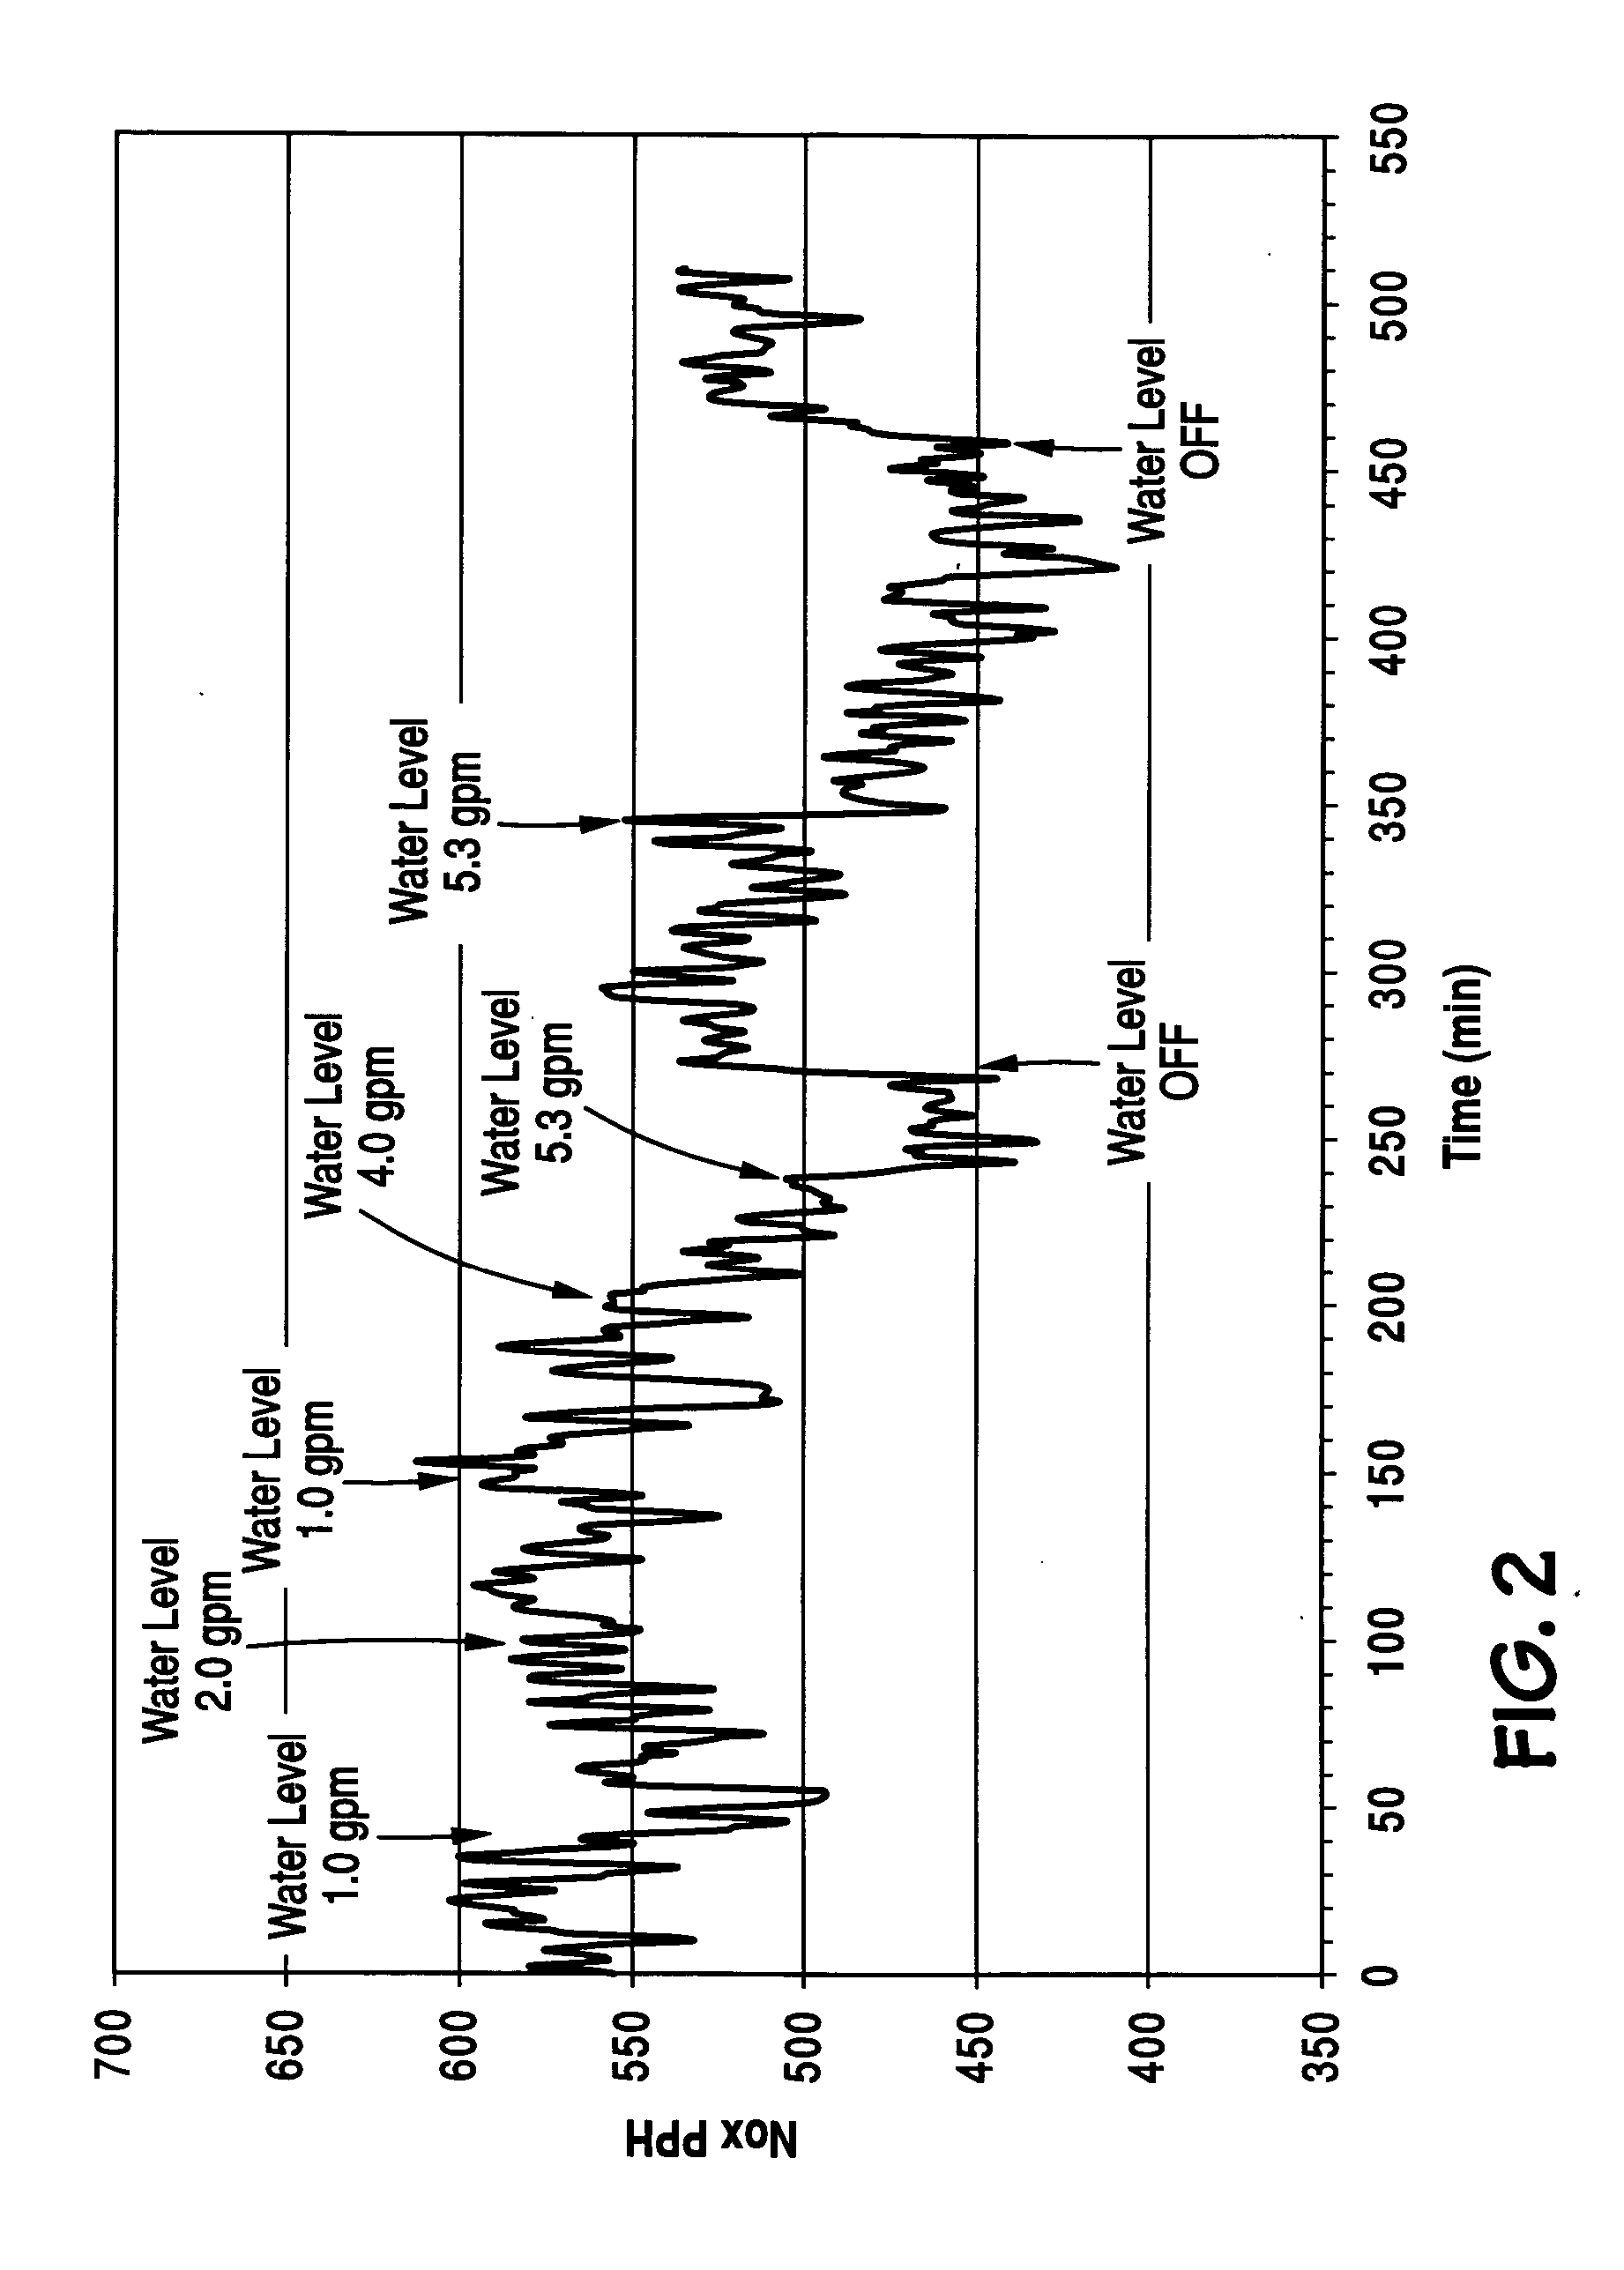 Method of reducing cement kiln NOx emissions by water injection